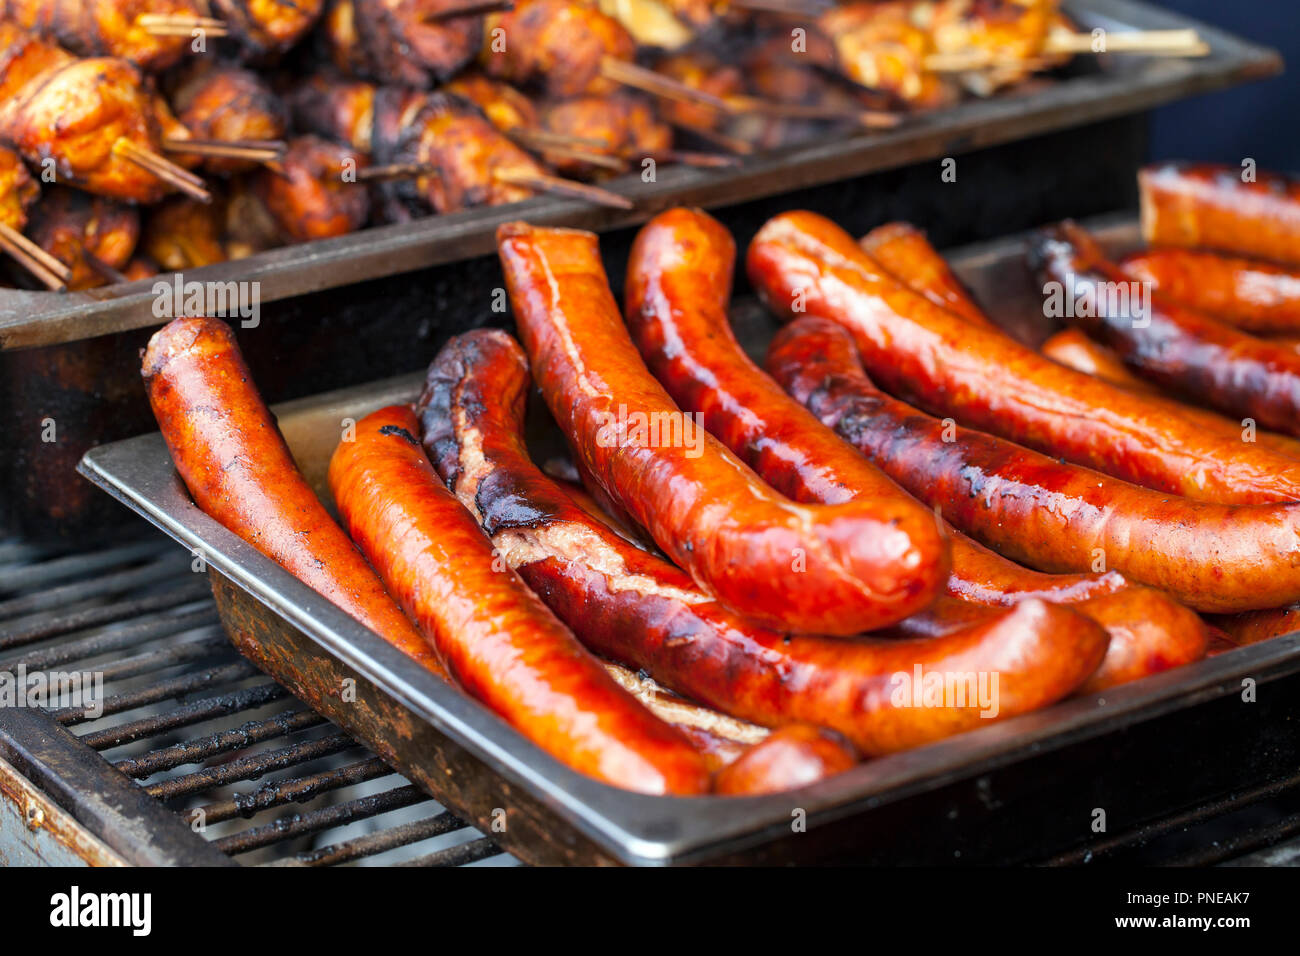 Grilled sausages and chicken skewers Stock Photo